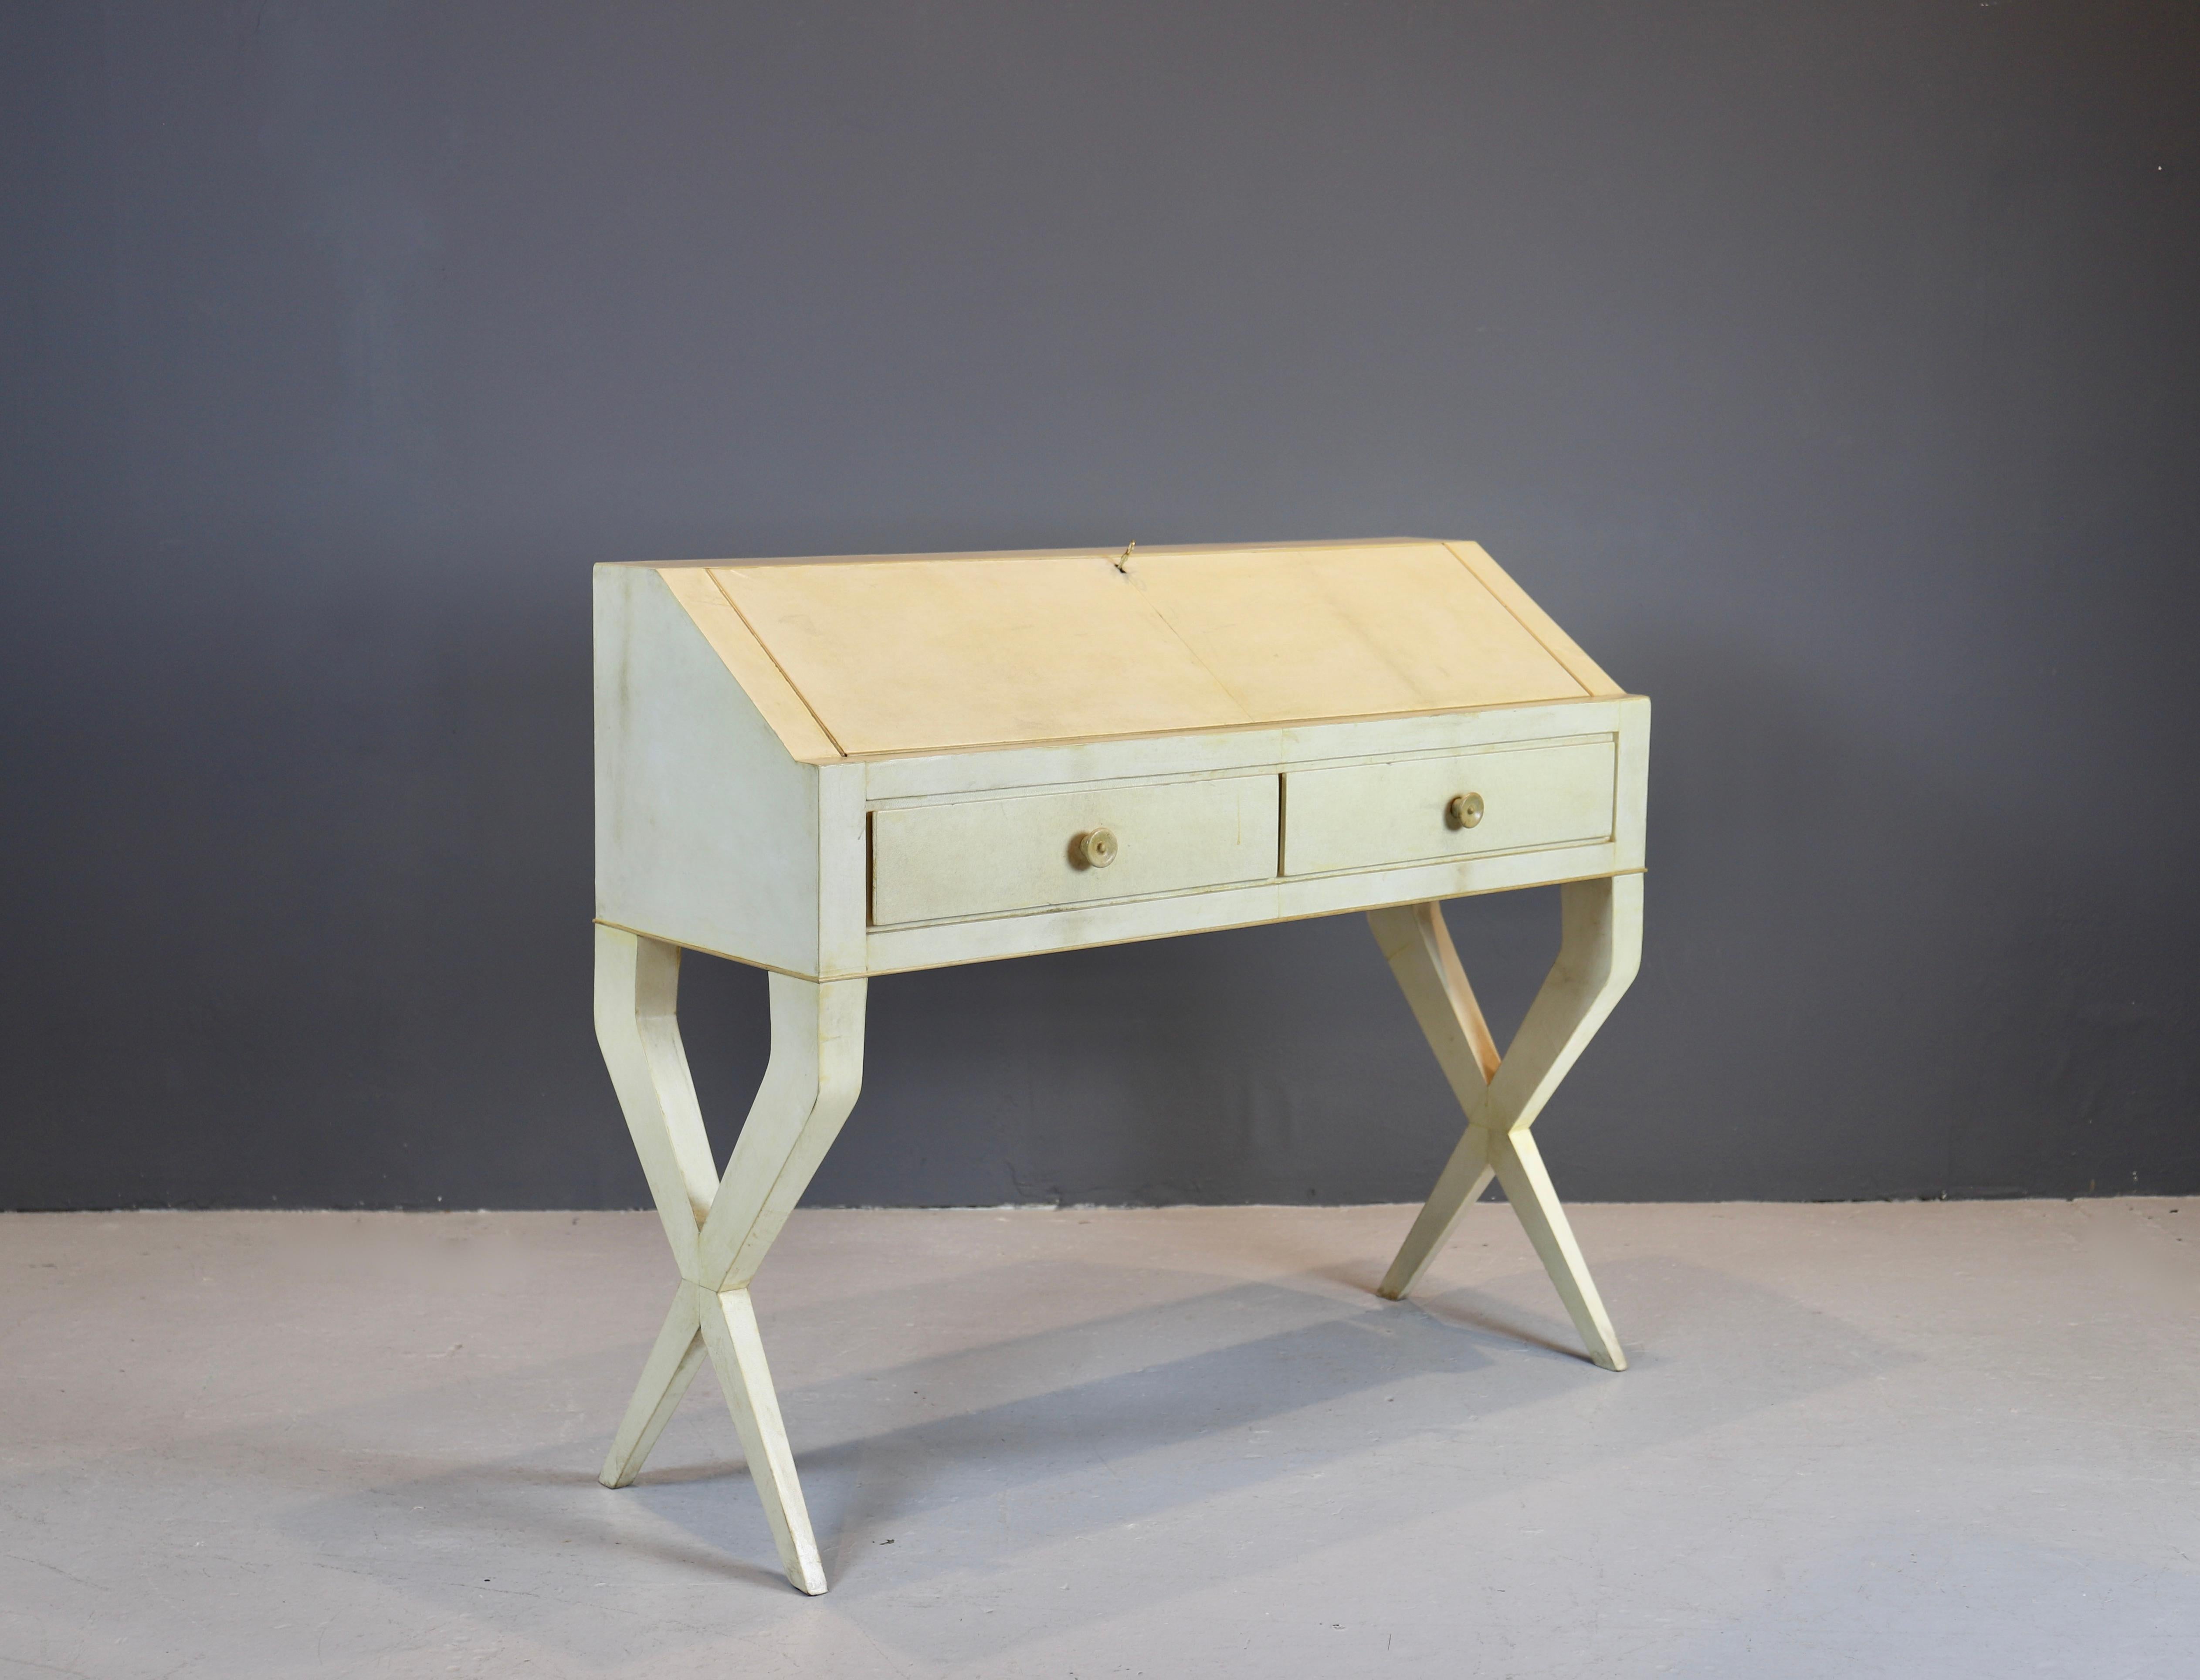 Gio Ponti secretary.
Italy, circa 1938.
Vellum over wood, Italian walnut, lacquered wood, brass .
Secretary features two drawers and a drop-front writing surface concealing storage. 
Sold with a certificate of expertise from the Gio Ponti